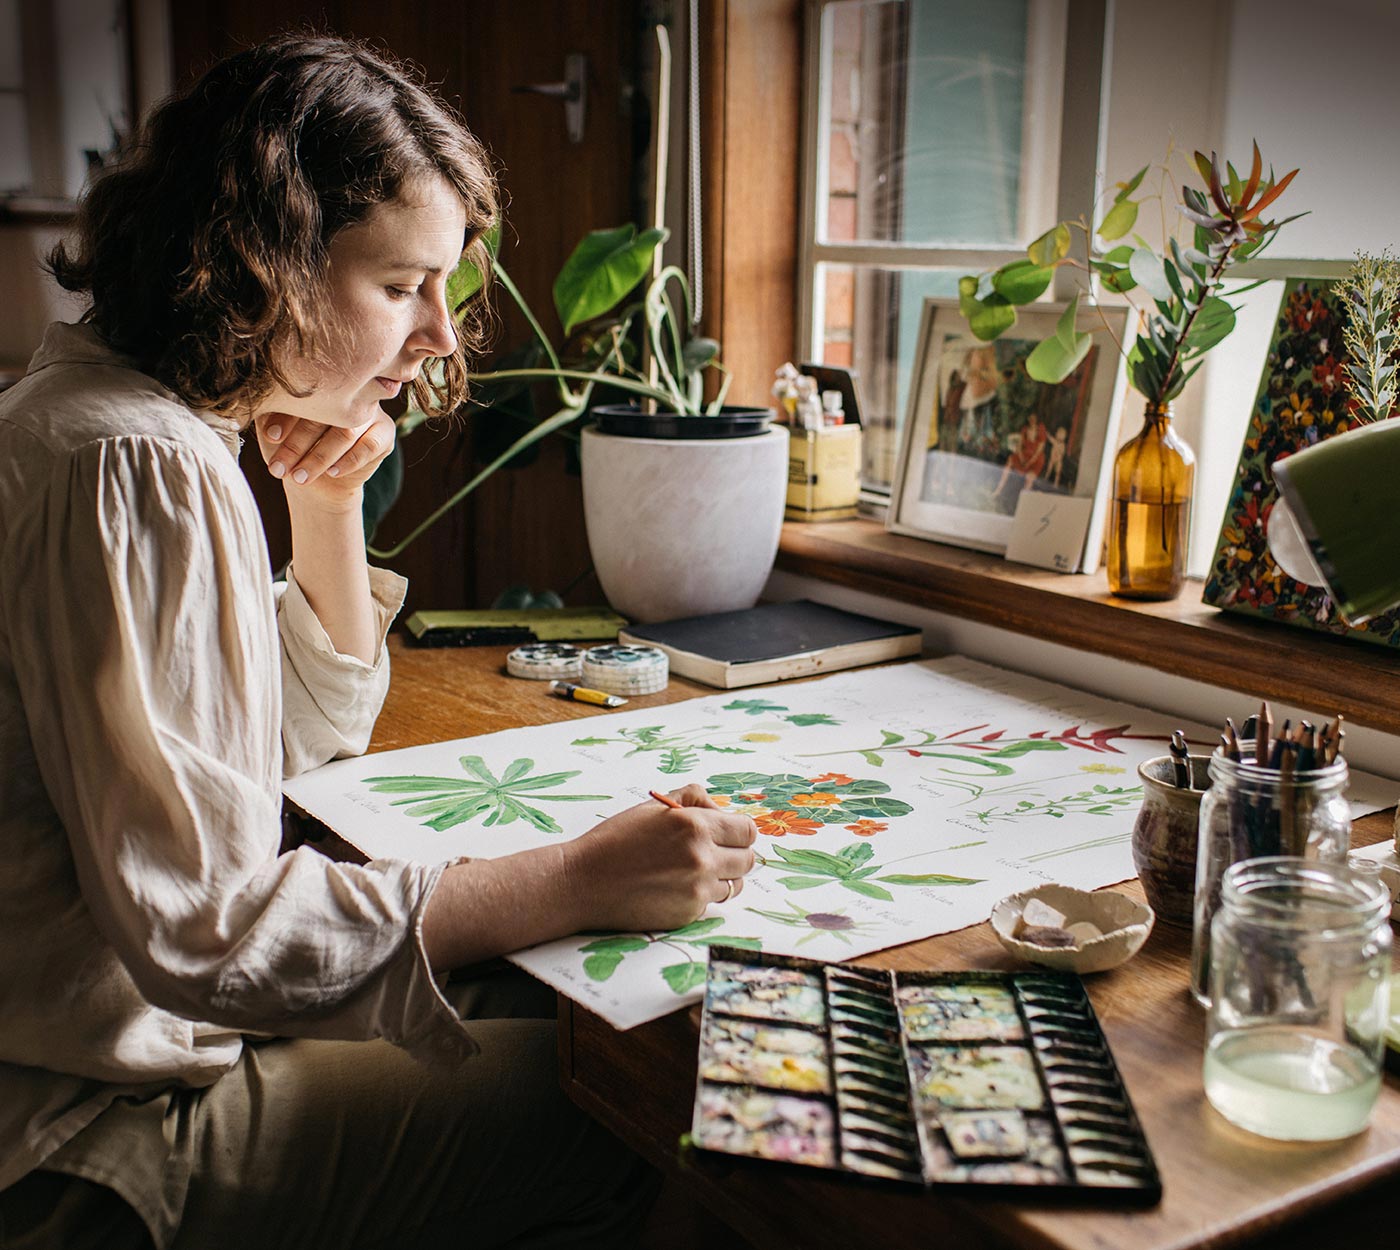 Brunette woman sitting at desk painting flowers with watercolour paints